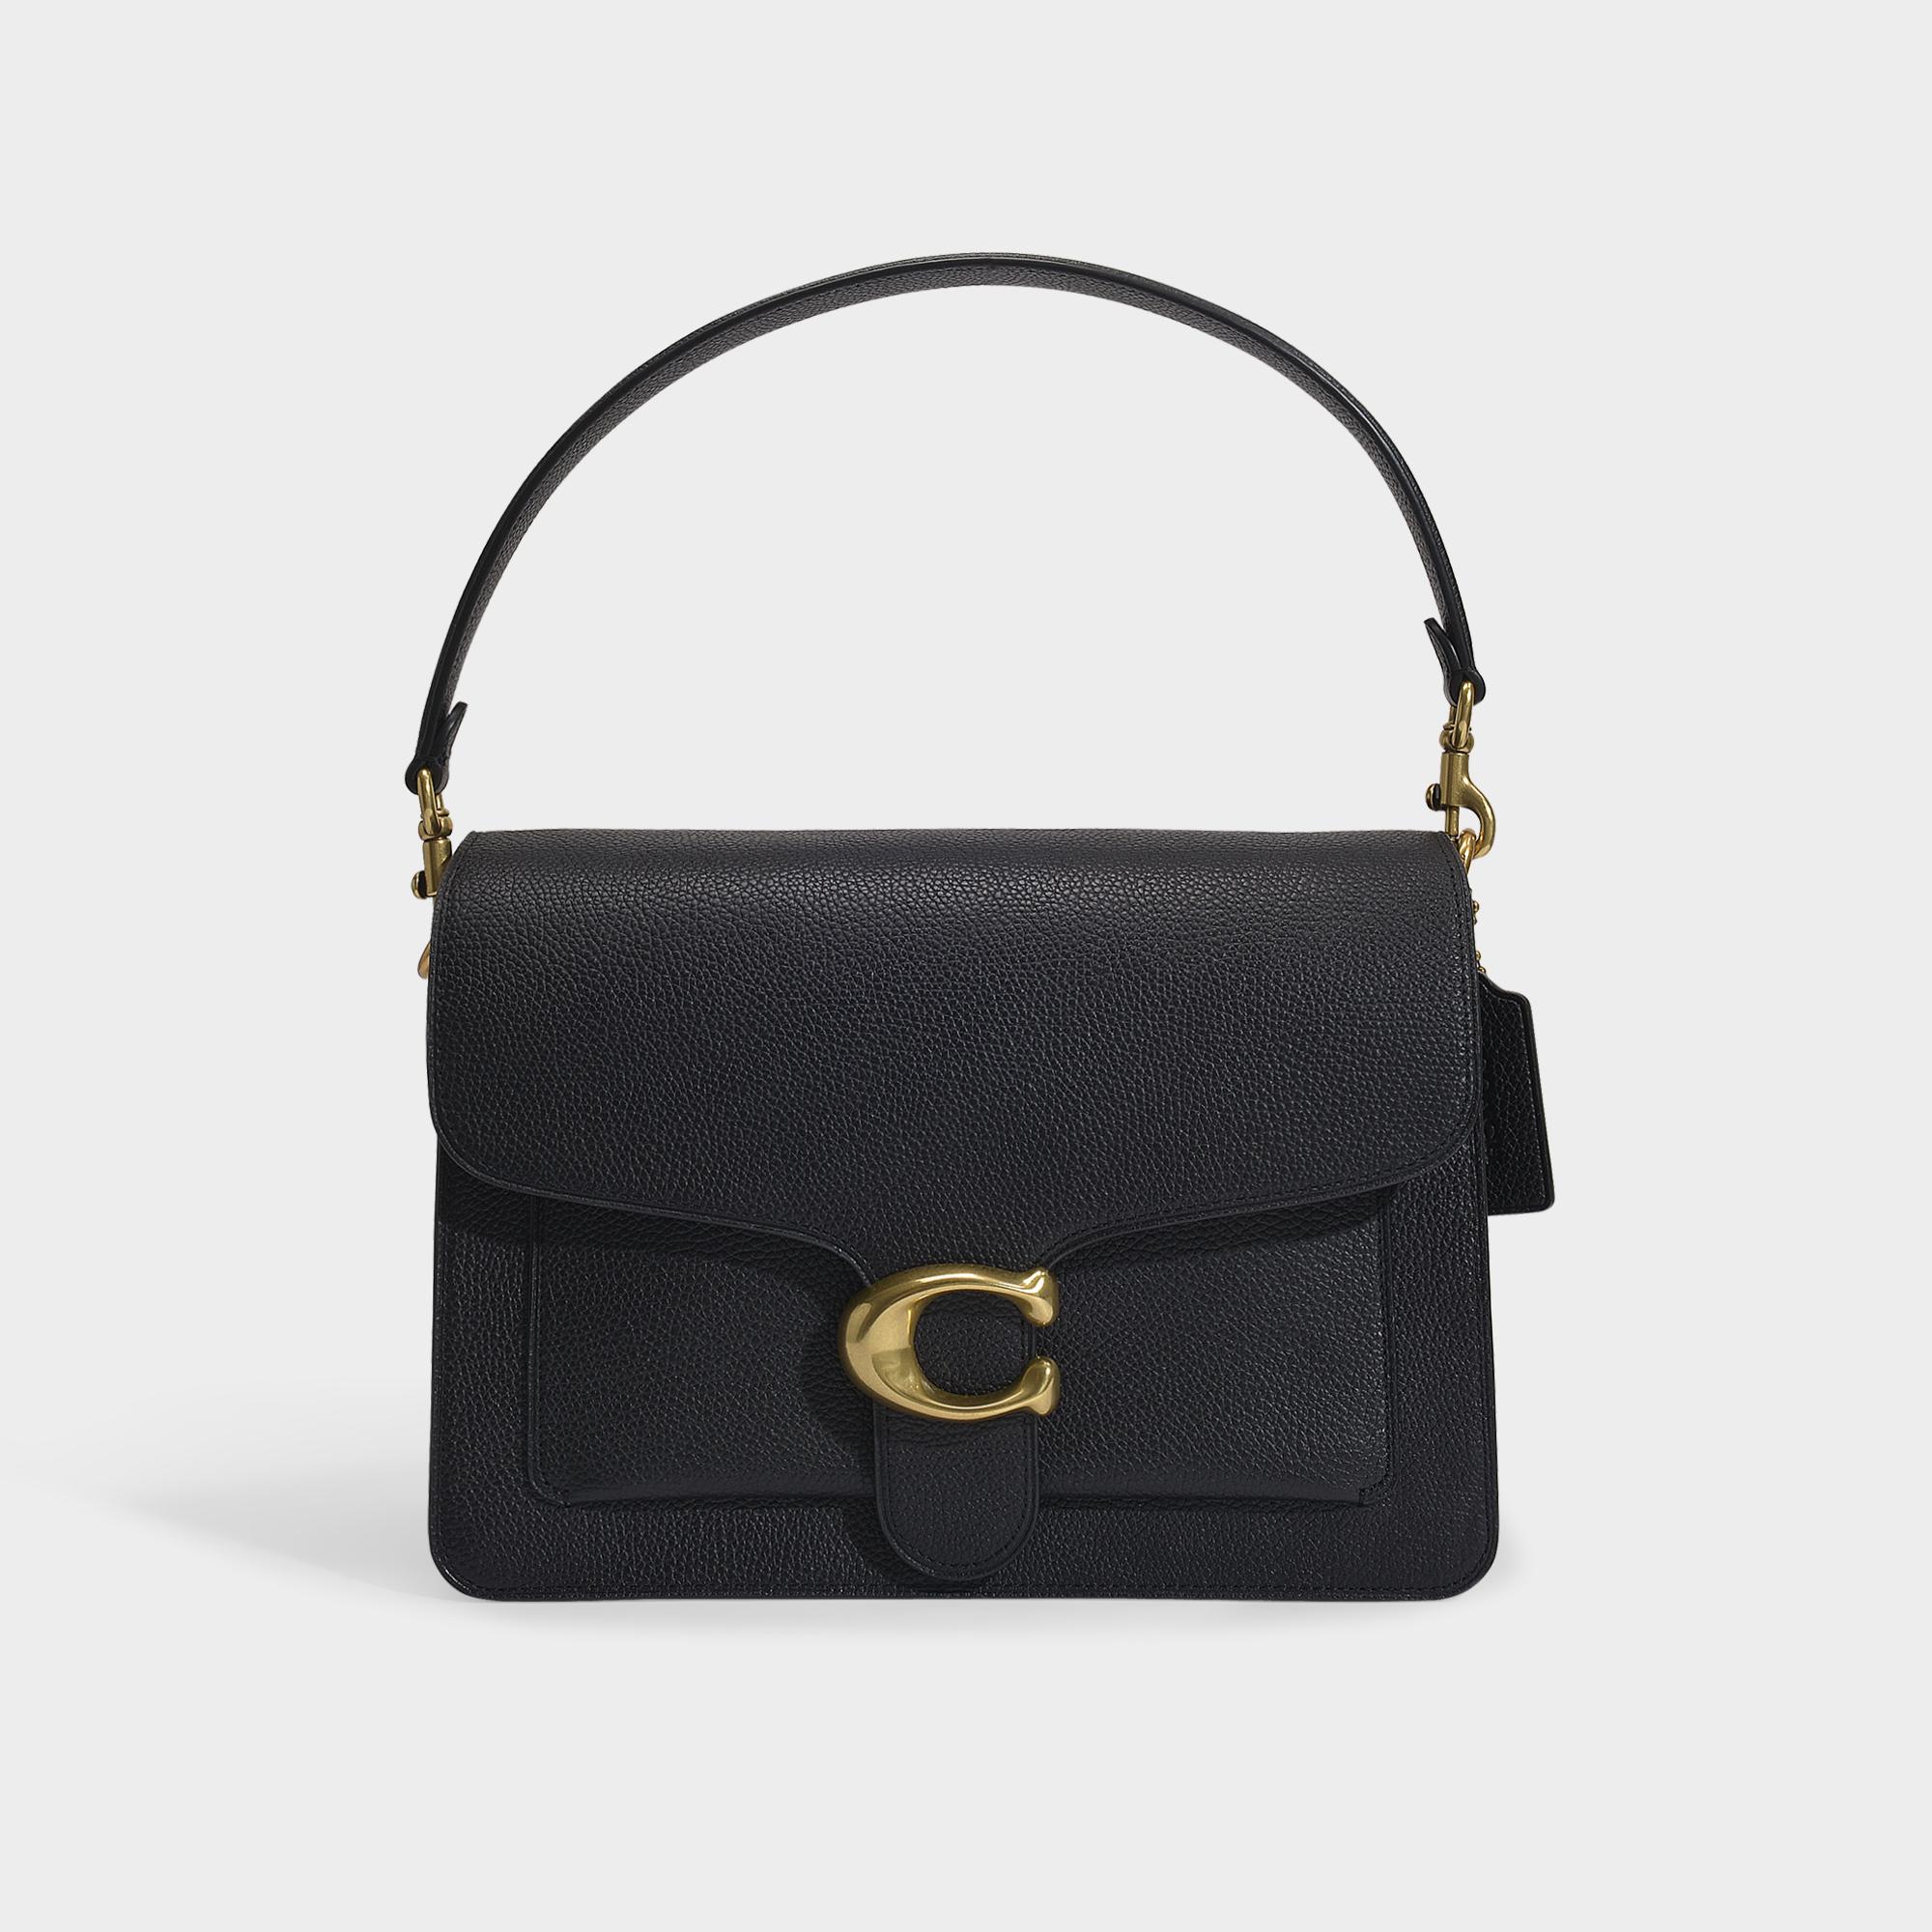 COACH Large Tabby Bag In Black Refined Calf Leather in Black - Lyst